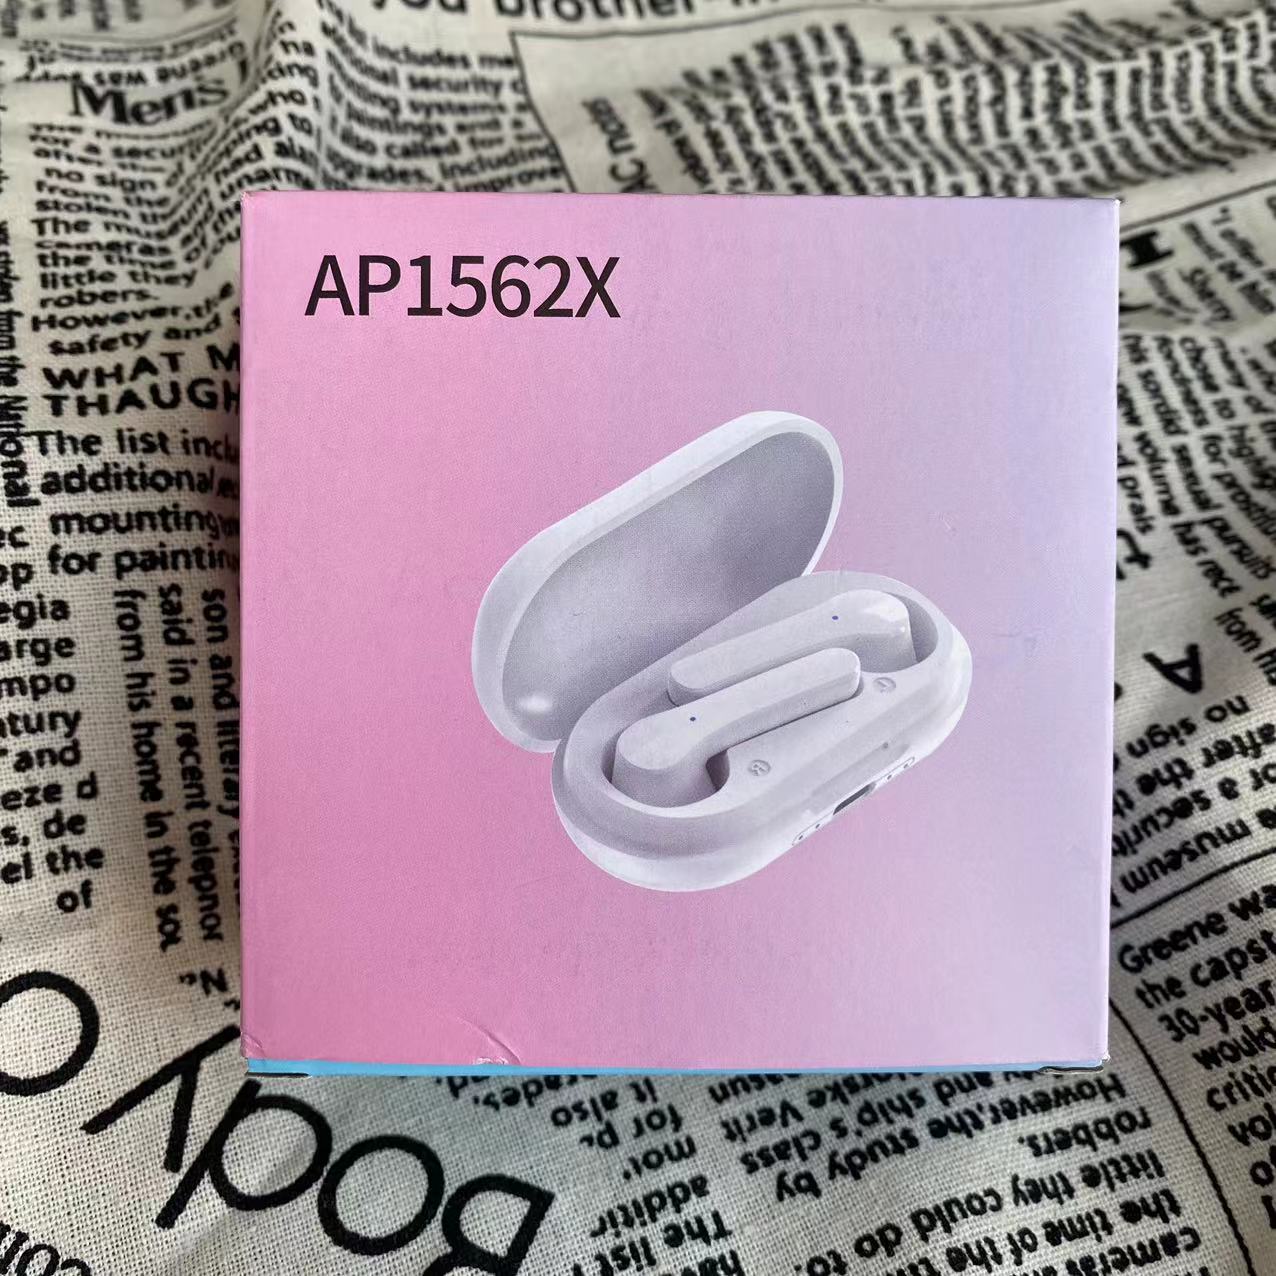 

USA&EU Warehouse 2-4 Days Delivery Verified OS16.3 Pr G3 G2 earphone with Double-layer camouflage packaging Headphone headset with free shipping from USA warehouse, White